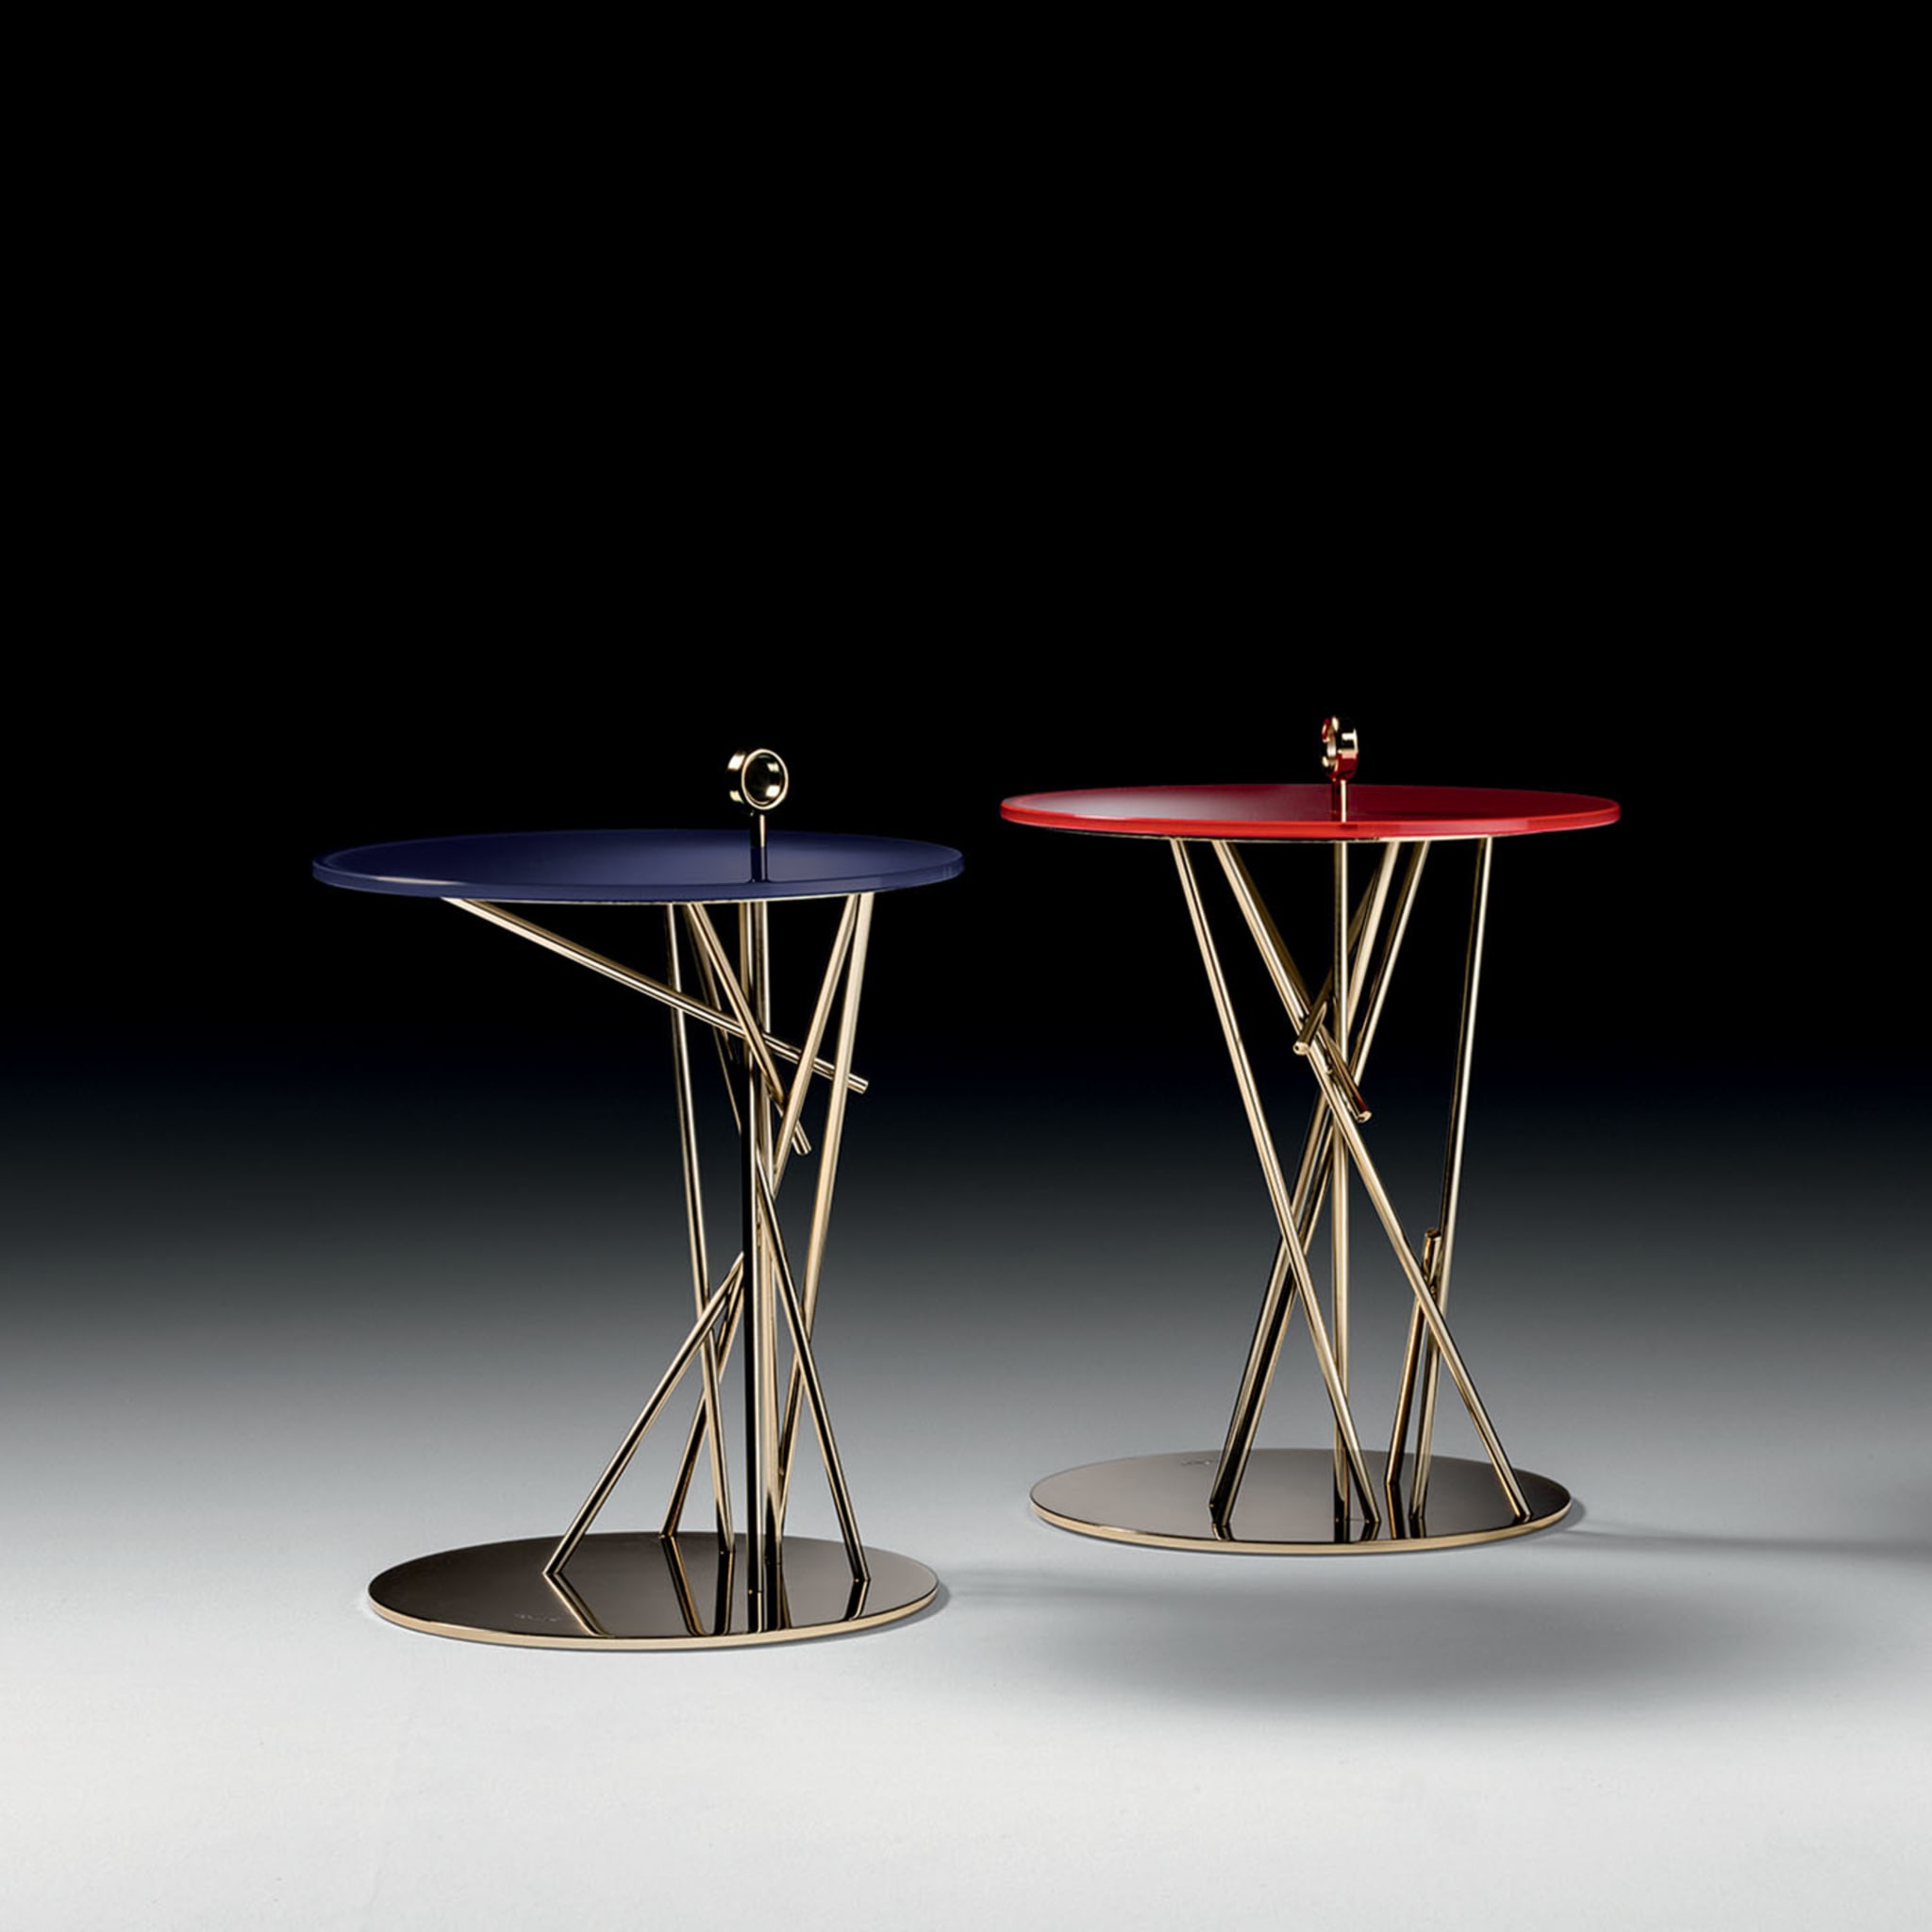 Tao Side Table by Claudia Campone and Martina Stancati - Alternative view 2